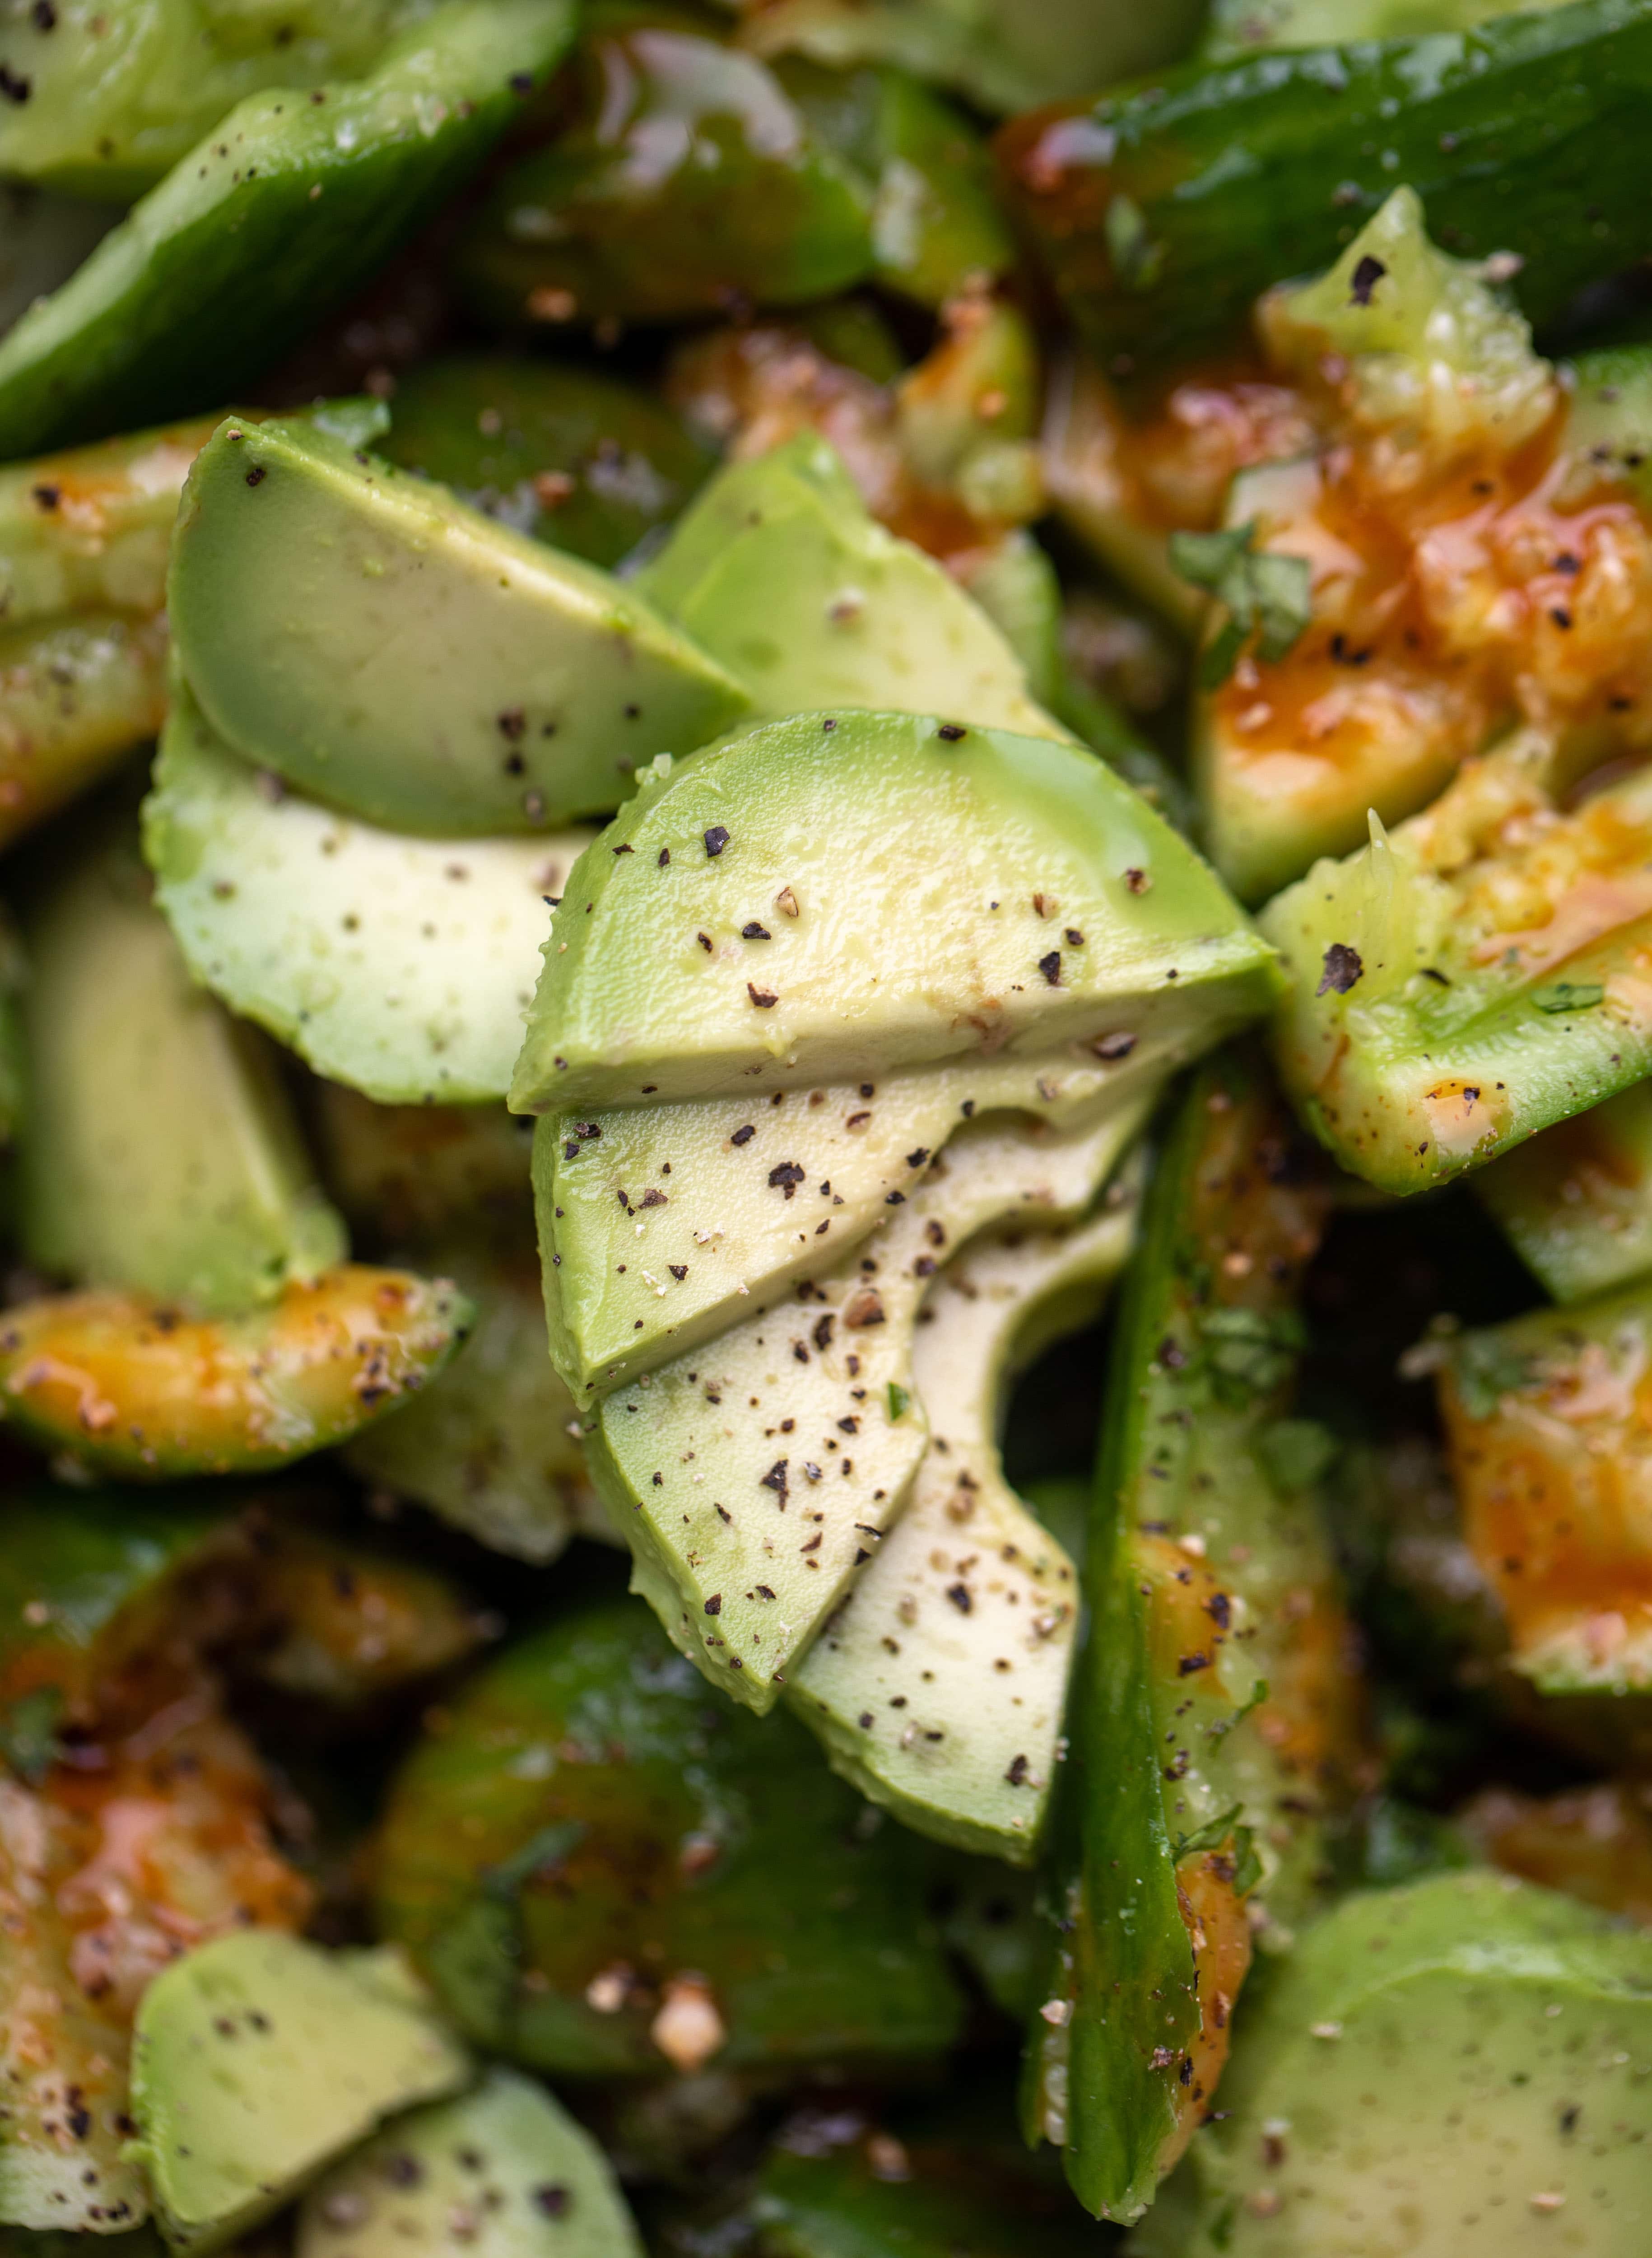 This smashed buffalo cucumber salad is filled with tons of buffalo wing flavor! Avocado, blue cheese, peanuts and lime juice make this irresistible. 